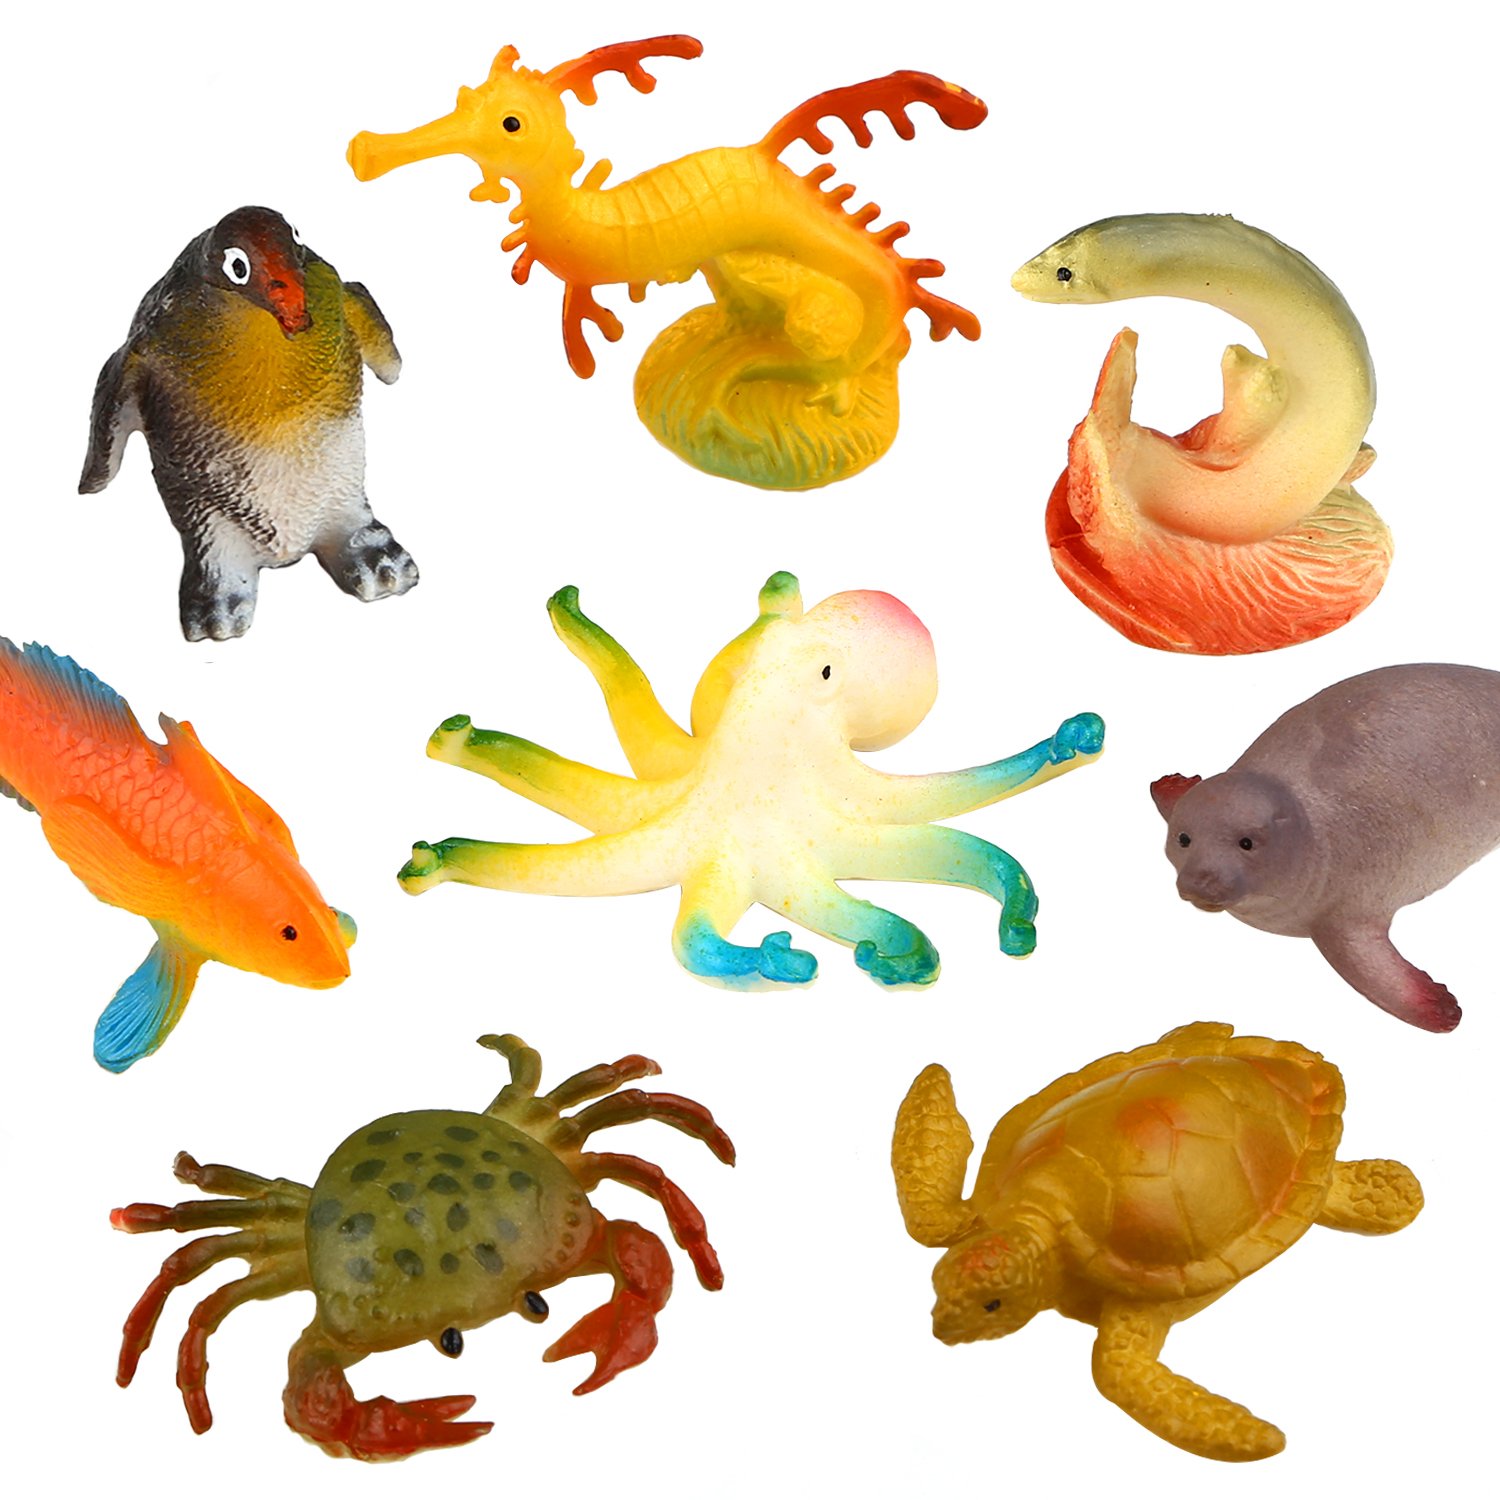 Ocean Sea Animal, 52 Pack Assorted Mini Vinyl Plastic Animal Toy Set, Funcorn Toys Realistic Under The Sea Life Figure Bath Toy for Child Educational Party Cake Cupcake Topper,Valentines Day Gift